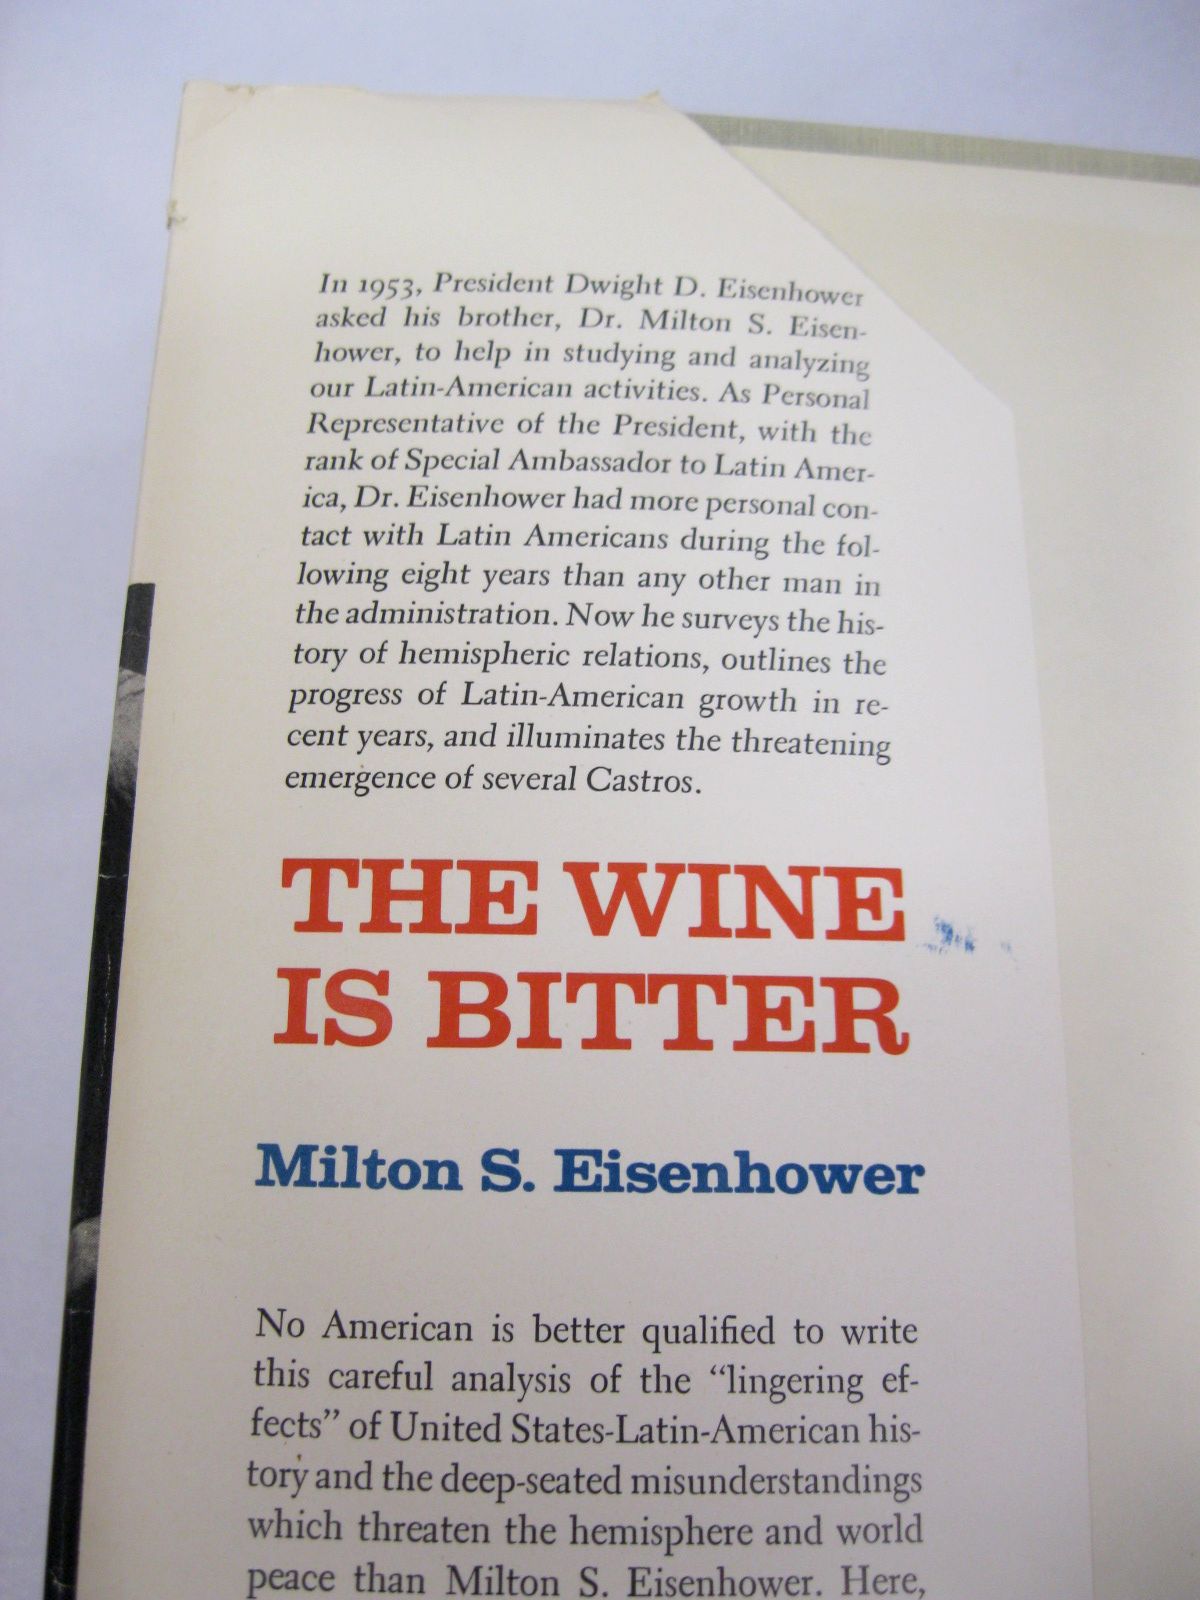 The Wine Is Bitter by Milton S. Eisenhower